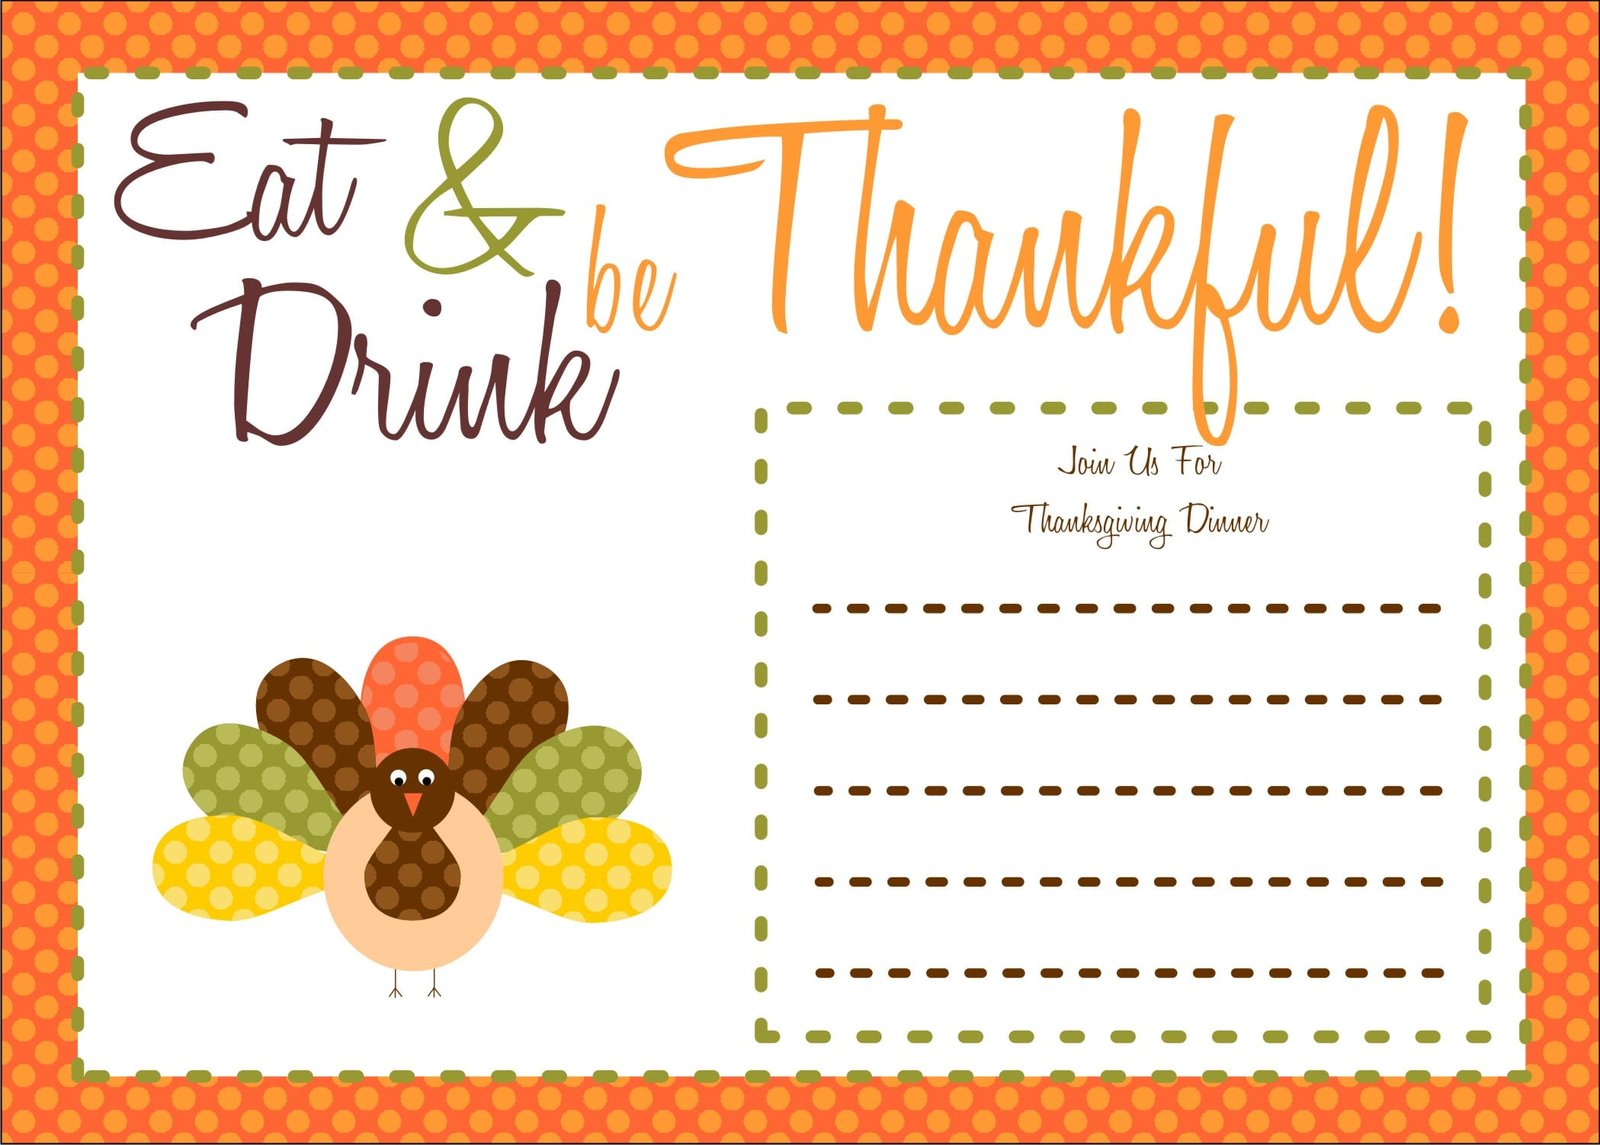 invitation-cards-for-thanksgiving